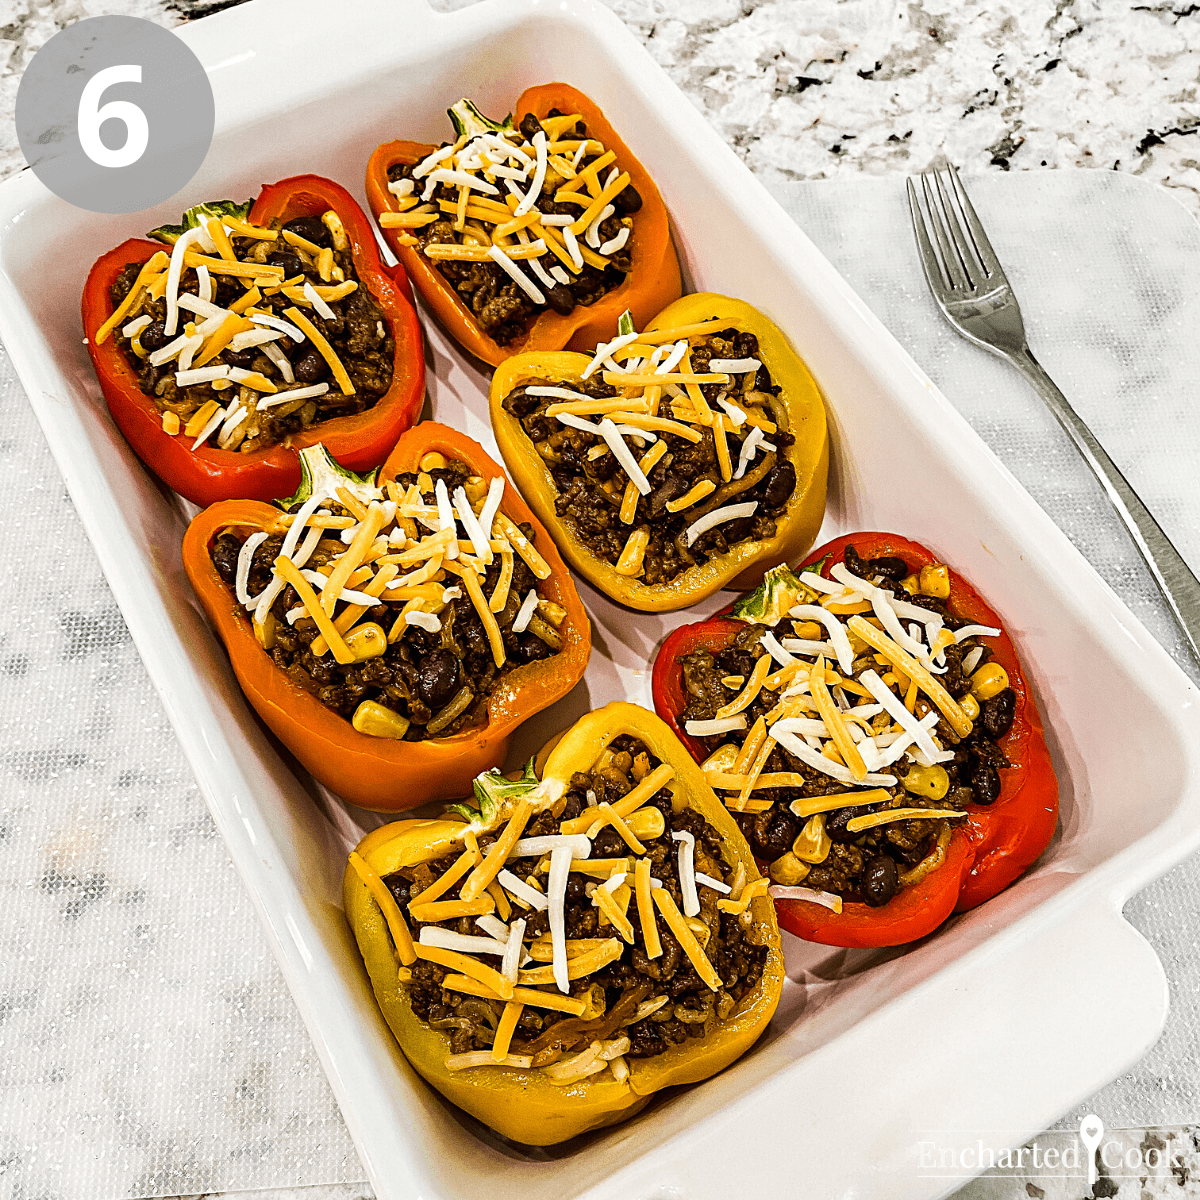 Halved bell peppers are filled with taco seasoned ground beef.